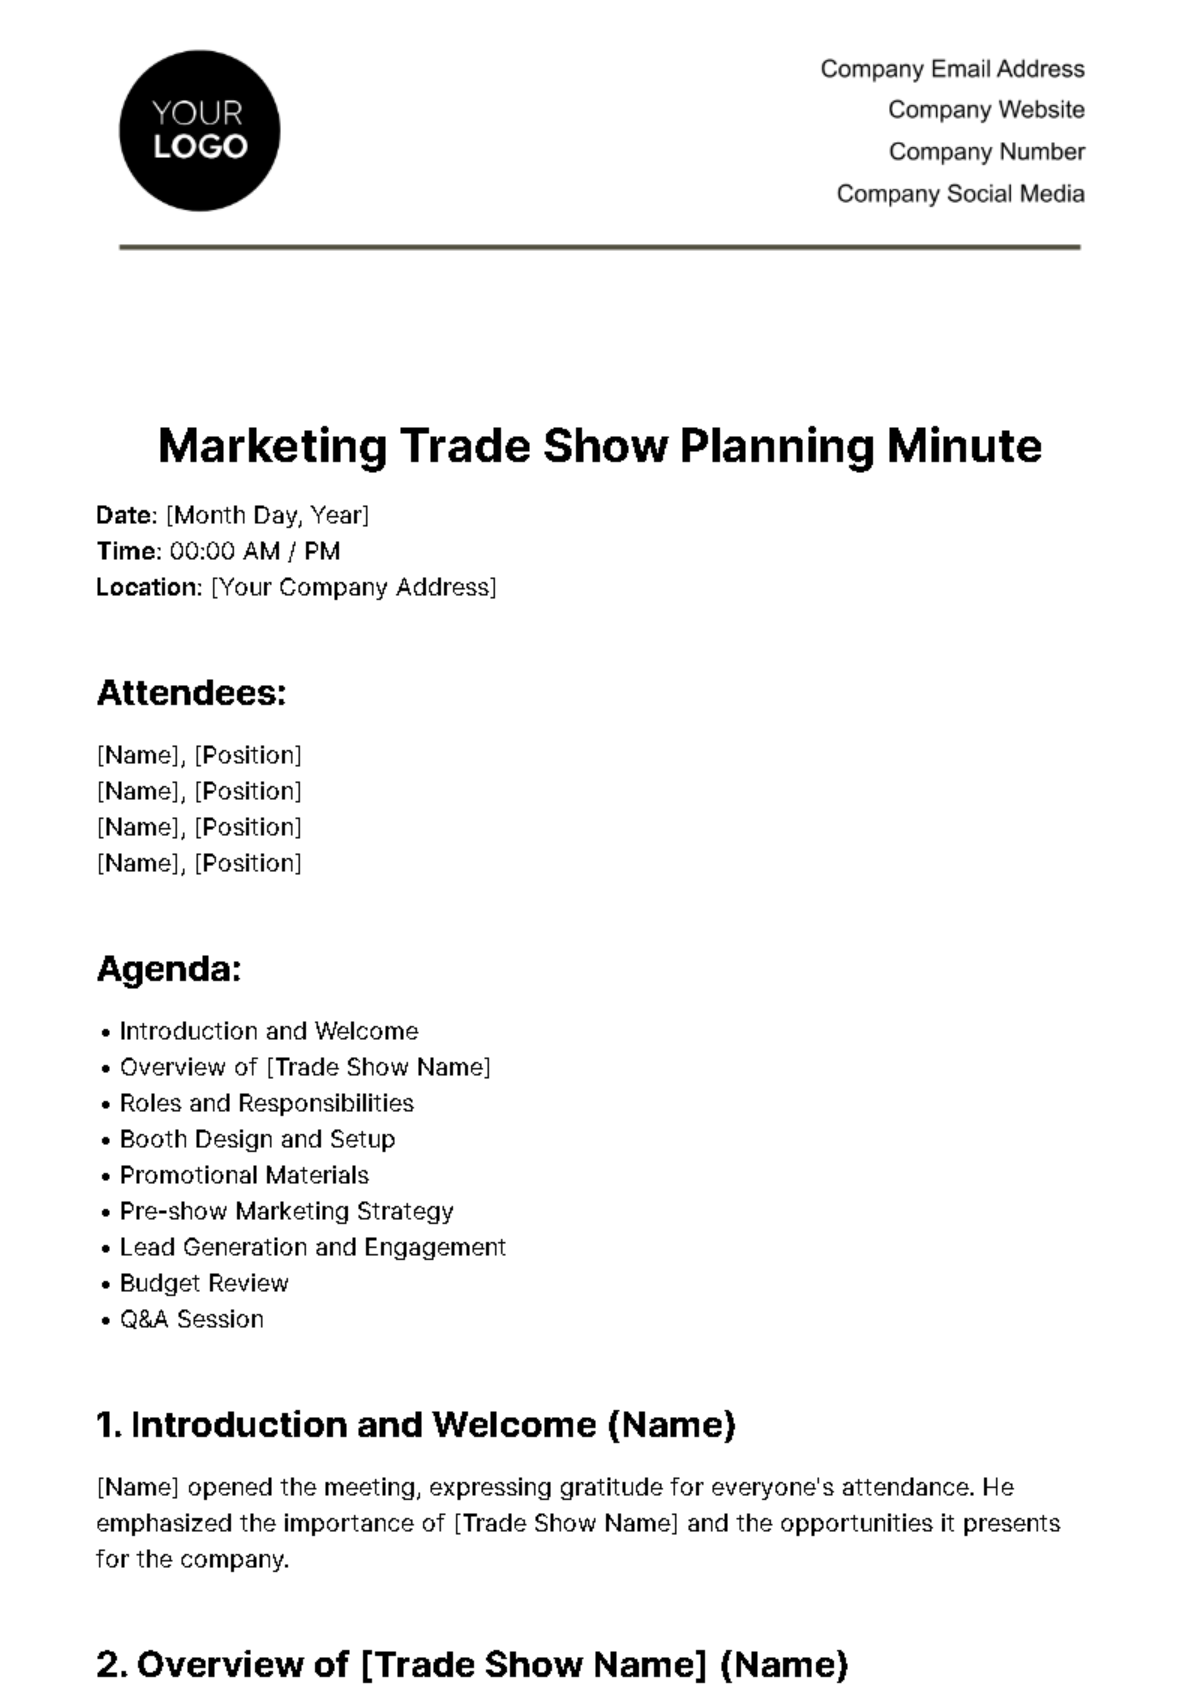 Marketing Trade Show Planning Minute Template